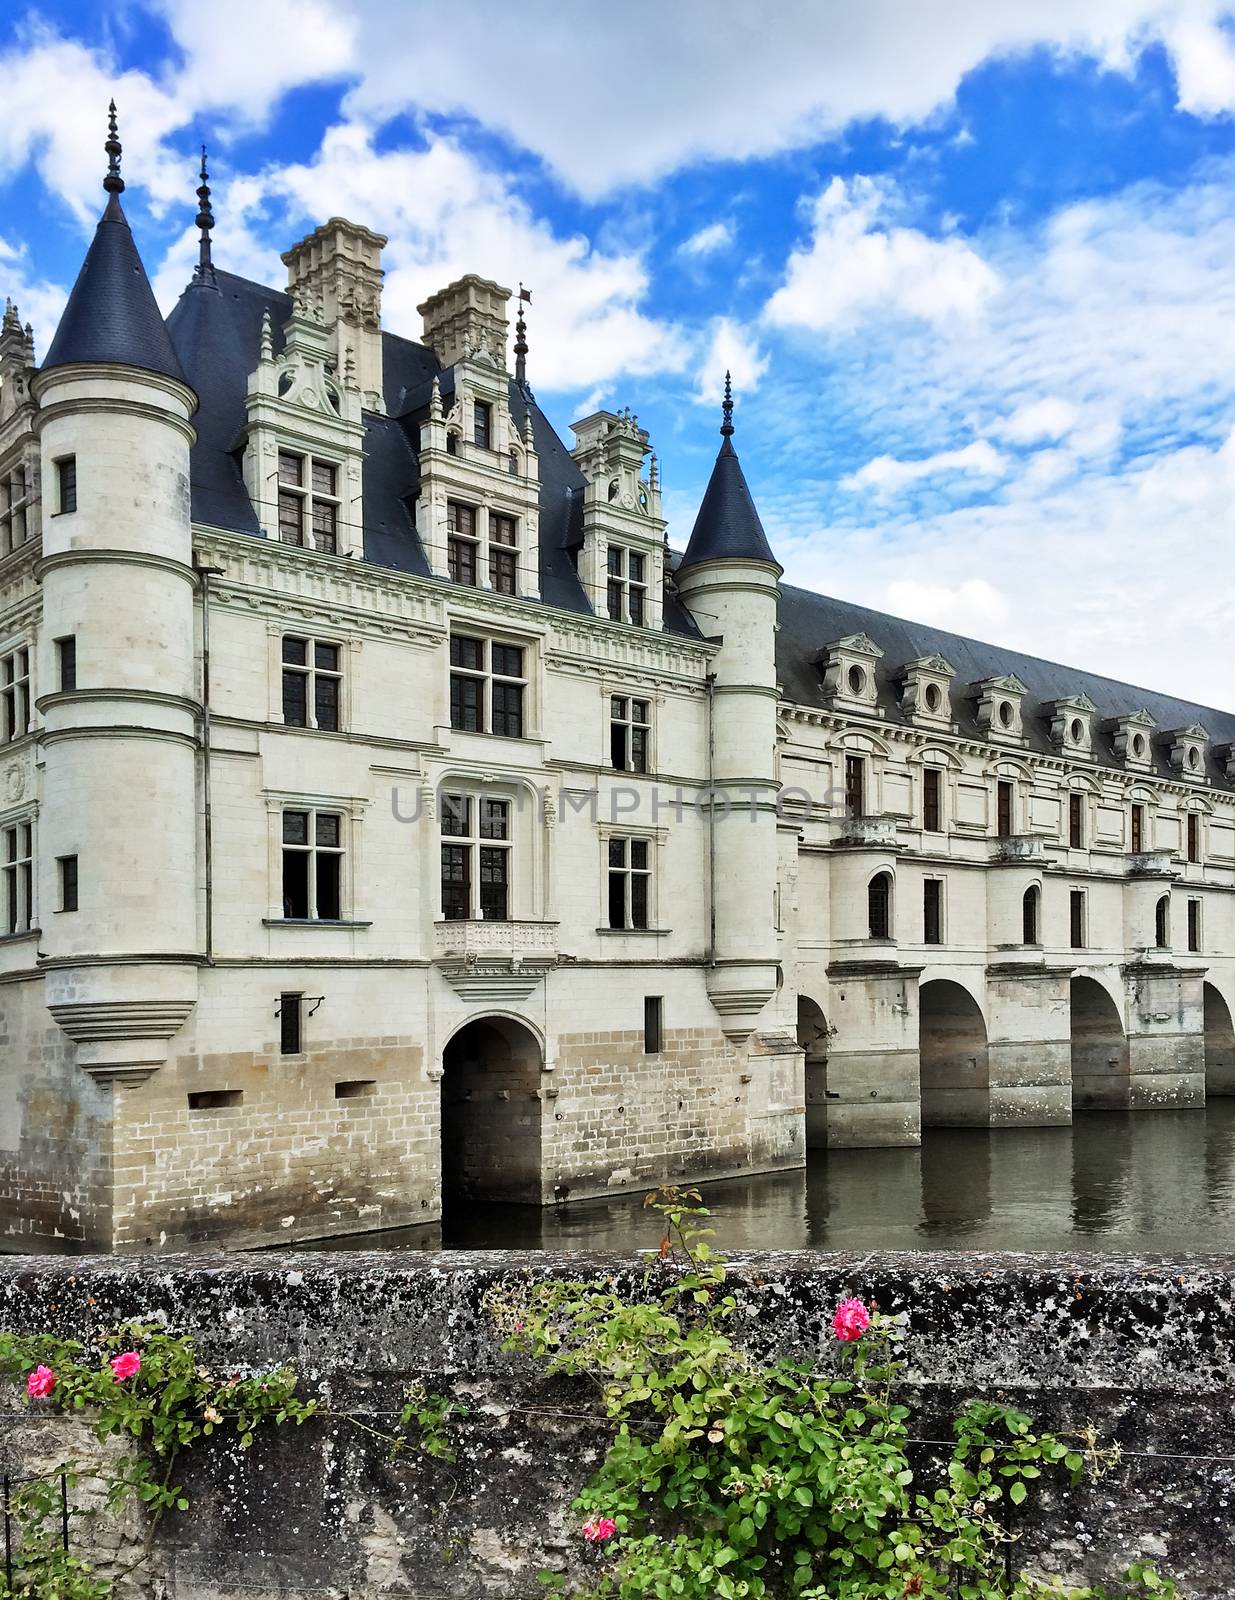 Chateau de Chenonceau in the Loire Valley, France by anikasalsera